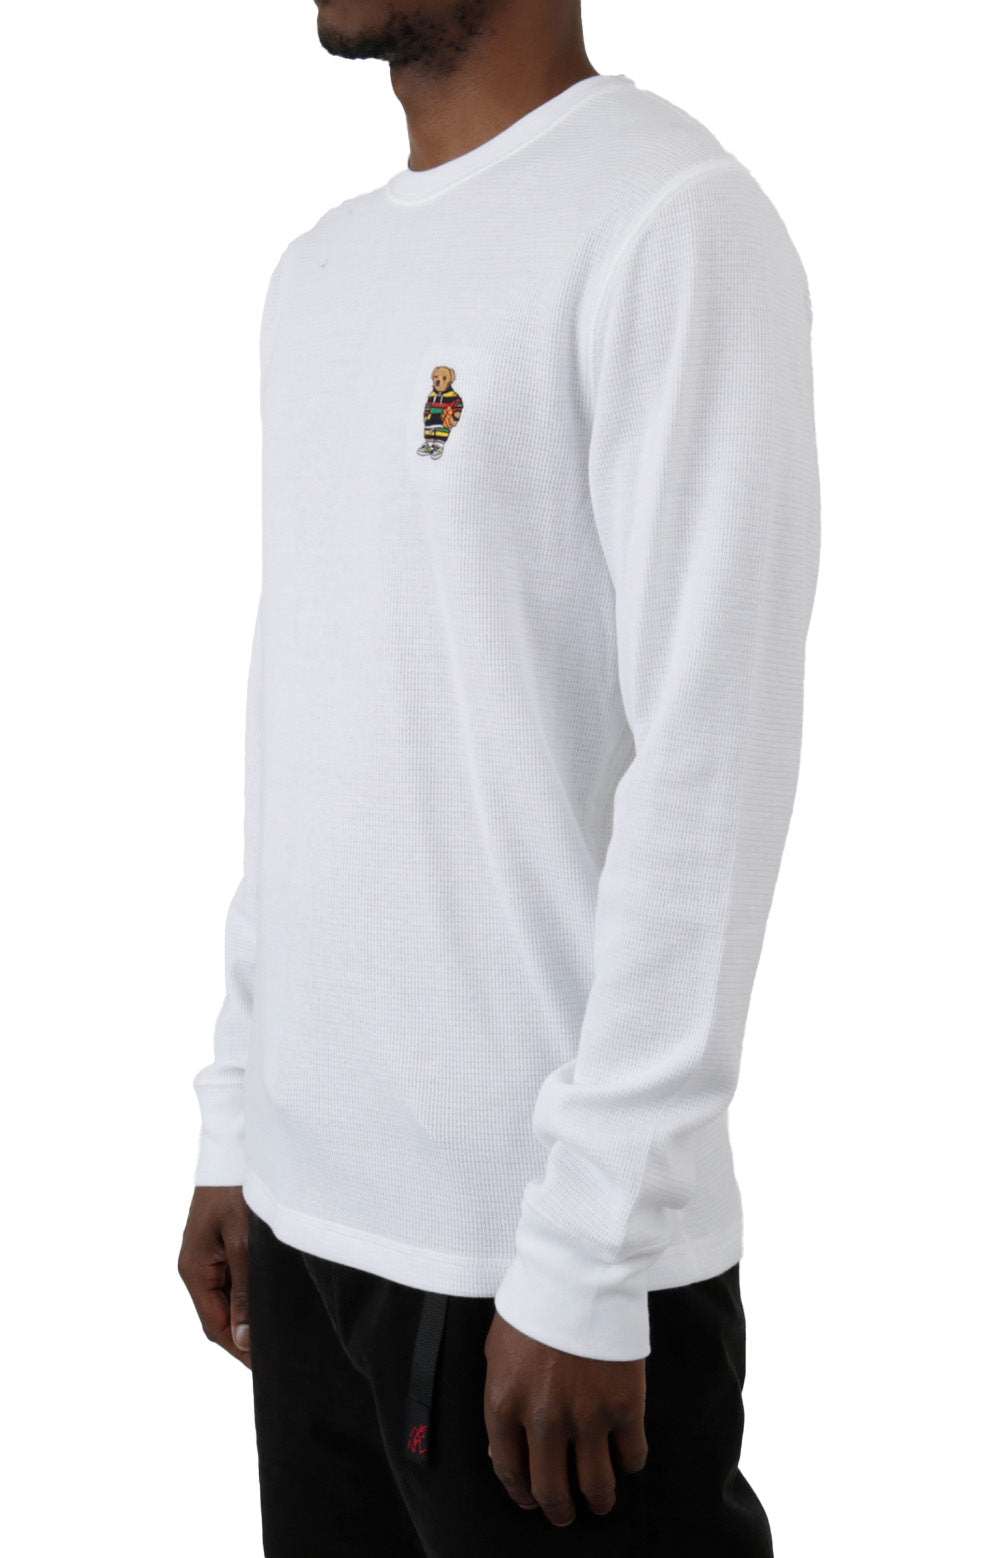 L/S Crew w/ Embroidery - White/Active Bear